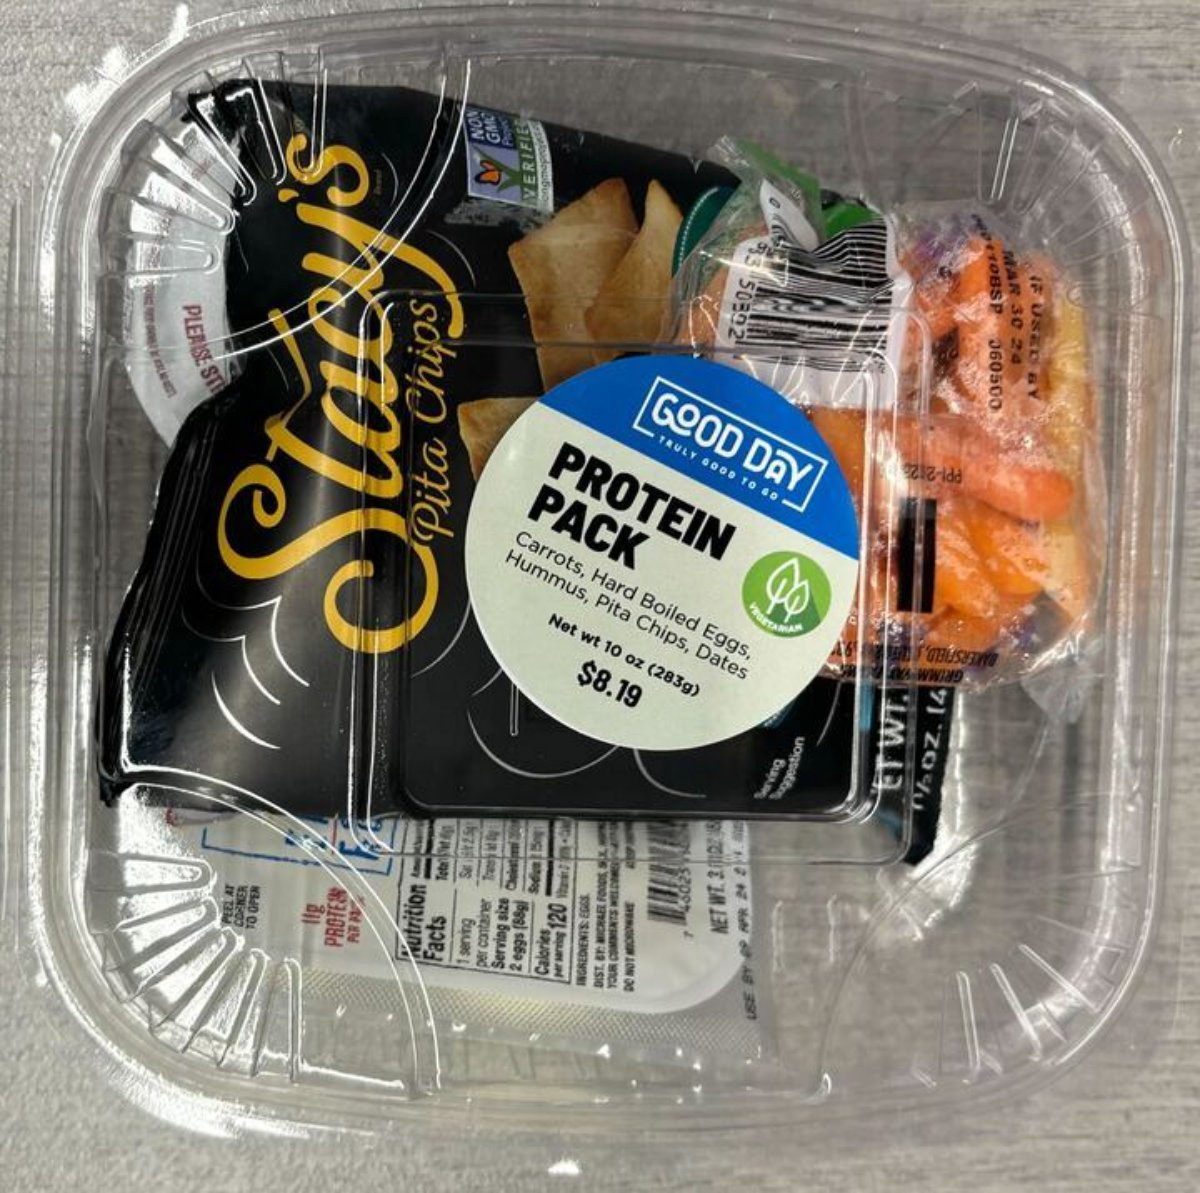 The protein pack snack that includes a bag of chips, carrots, a hard boiled egg, hummus and dates that are listed on the sticker Protein Pack by Good Day with $8.19